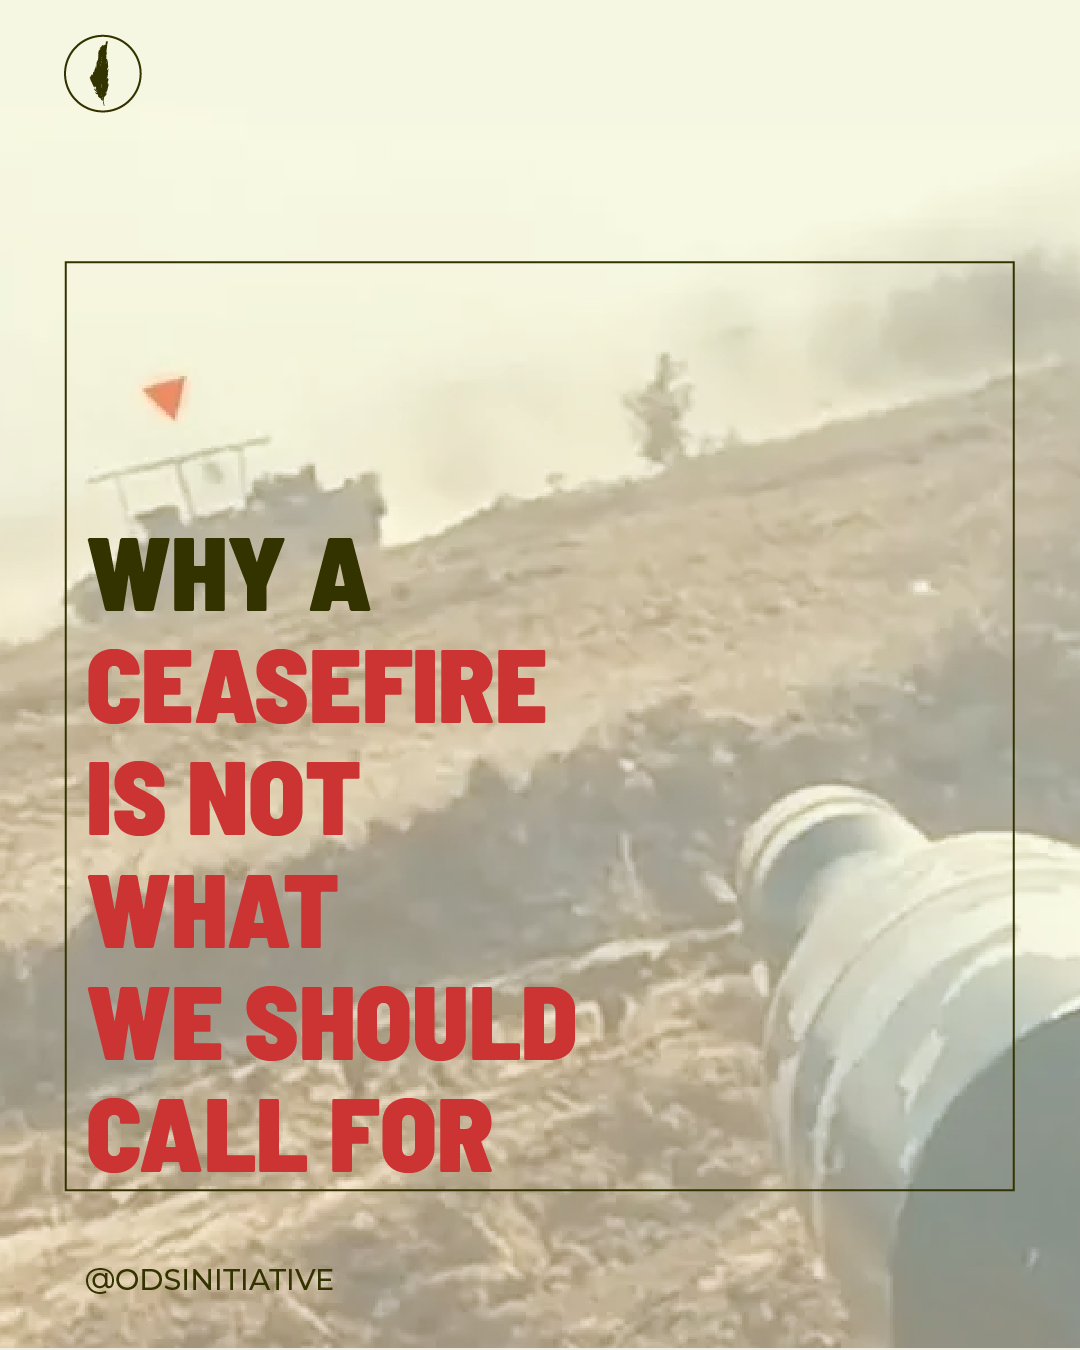 An image of the Palestinian resistance stating why a ceasefire is not what we should call for